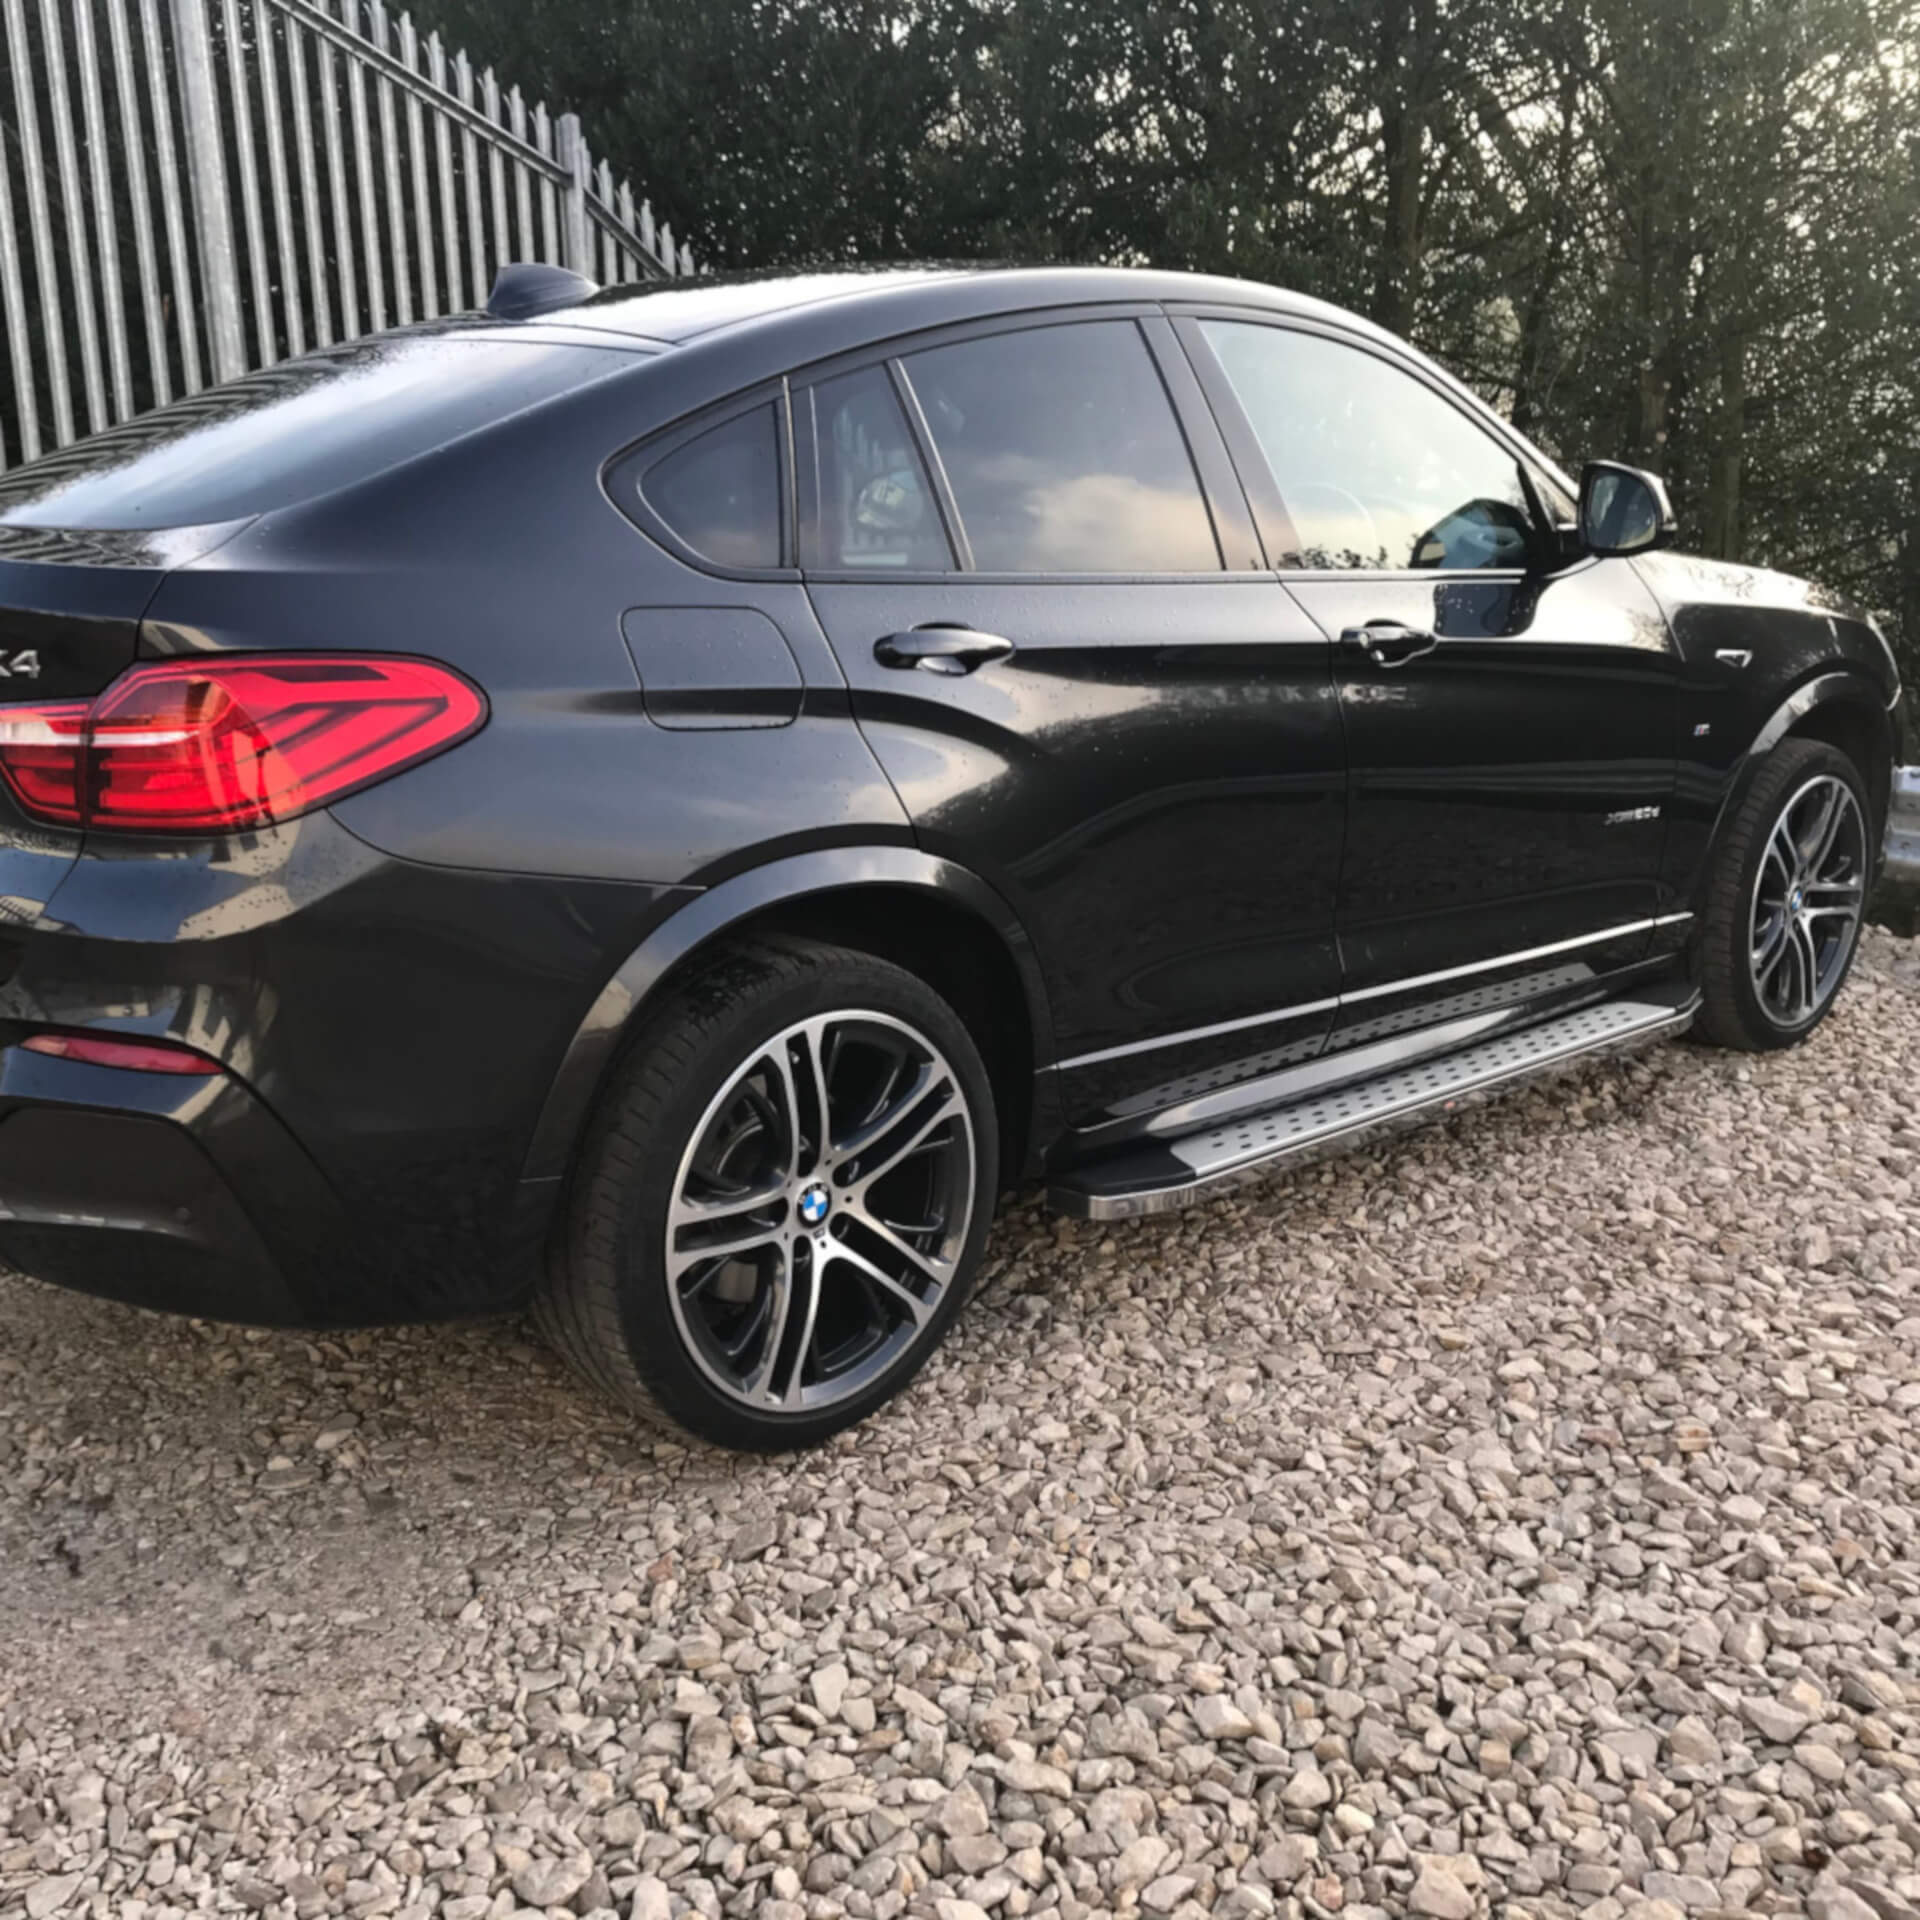 Direct4x4 accessories for BMW X4 vehicles with a photo of freedom side steps fitted to a black BMW X4 parked on gravel